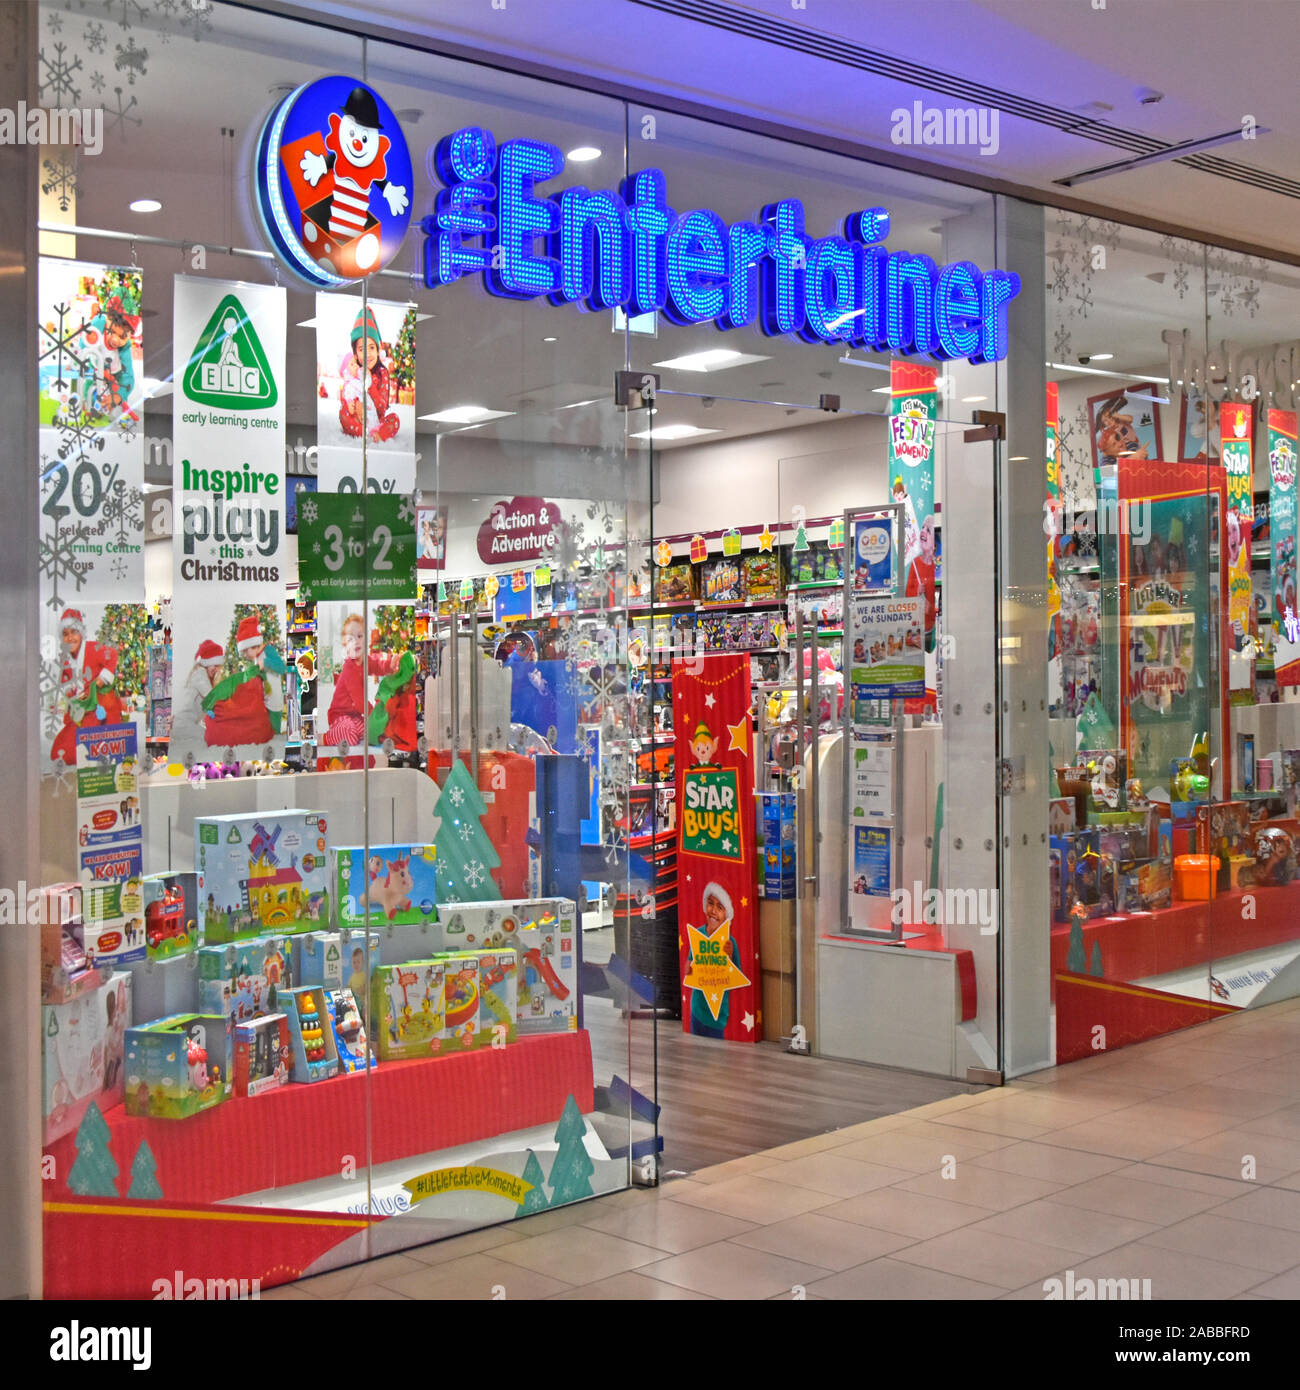 the entertainer toy shop